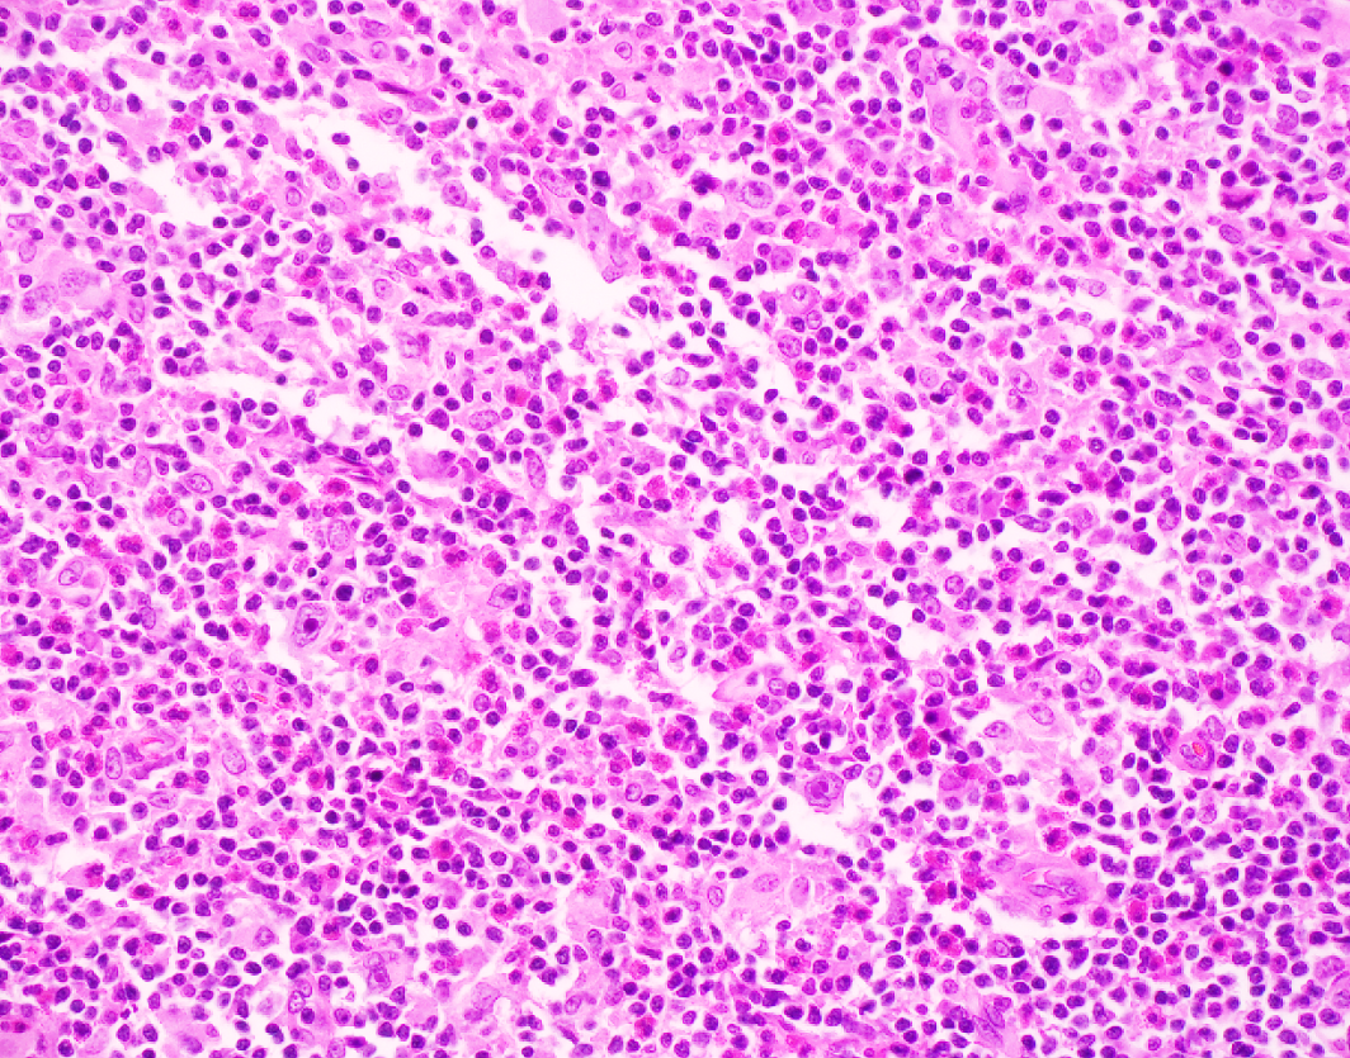 Section of lymph node with large cells with owl eye "Hodgkin cells" in a background of mixed inflammatory cells in a young male